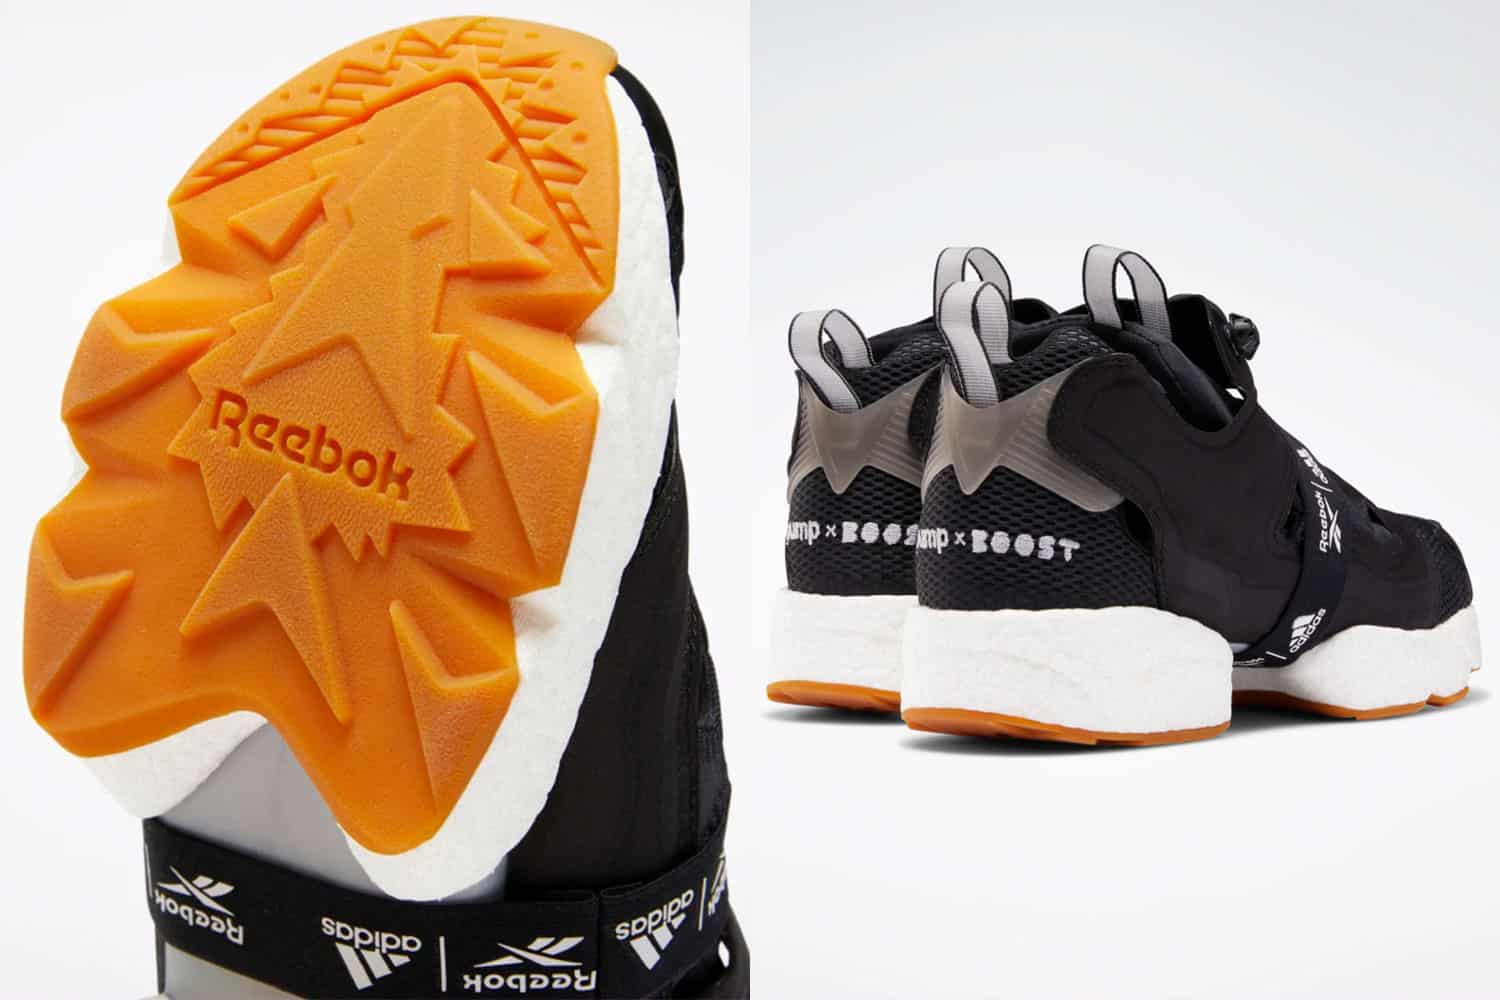 Why Reebok and Adidas Site Looks the Same?